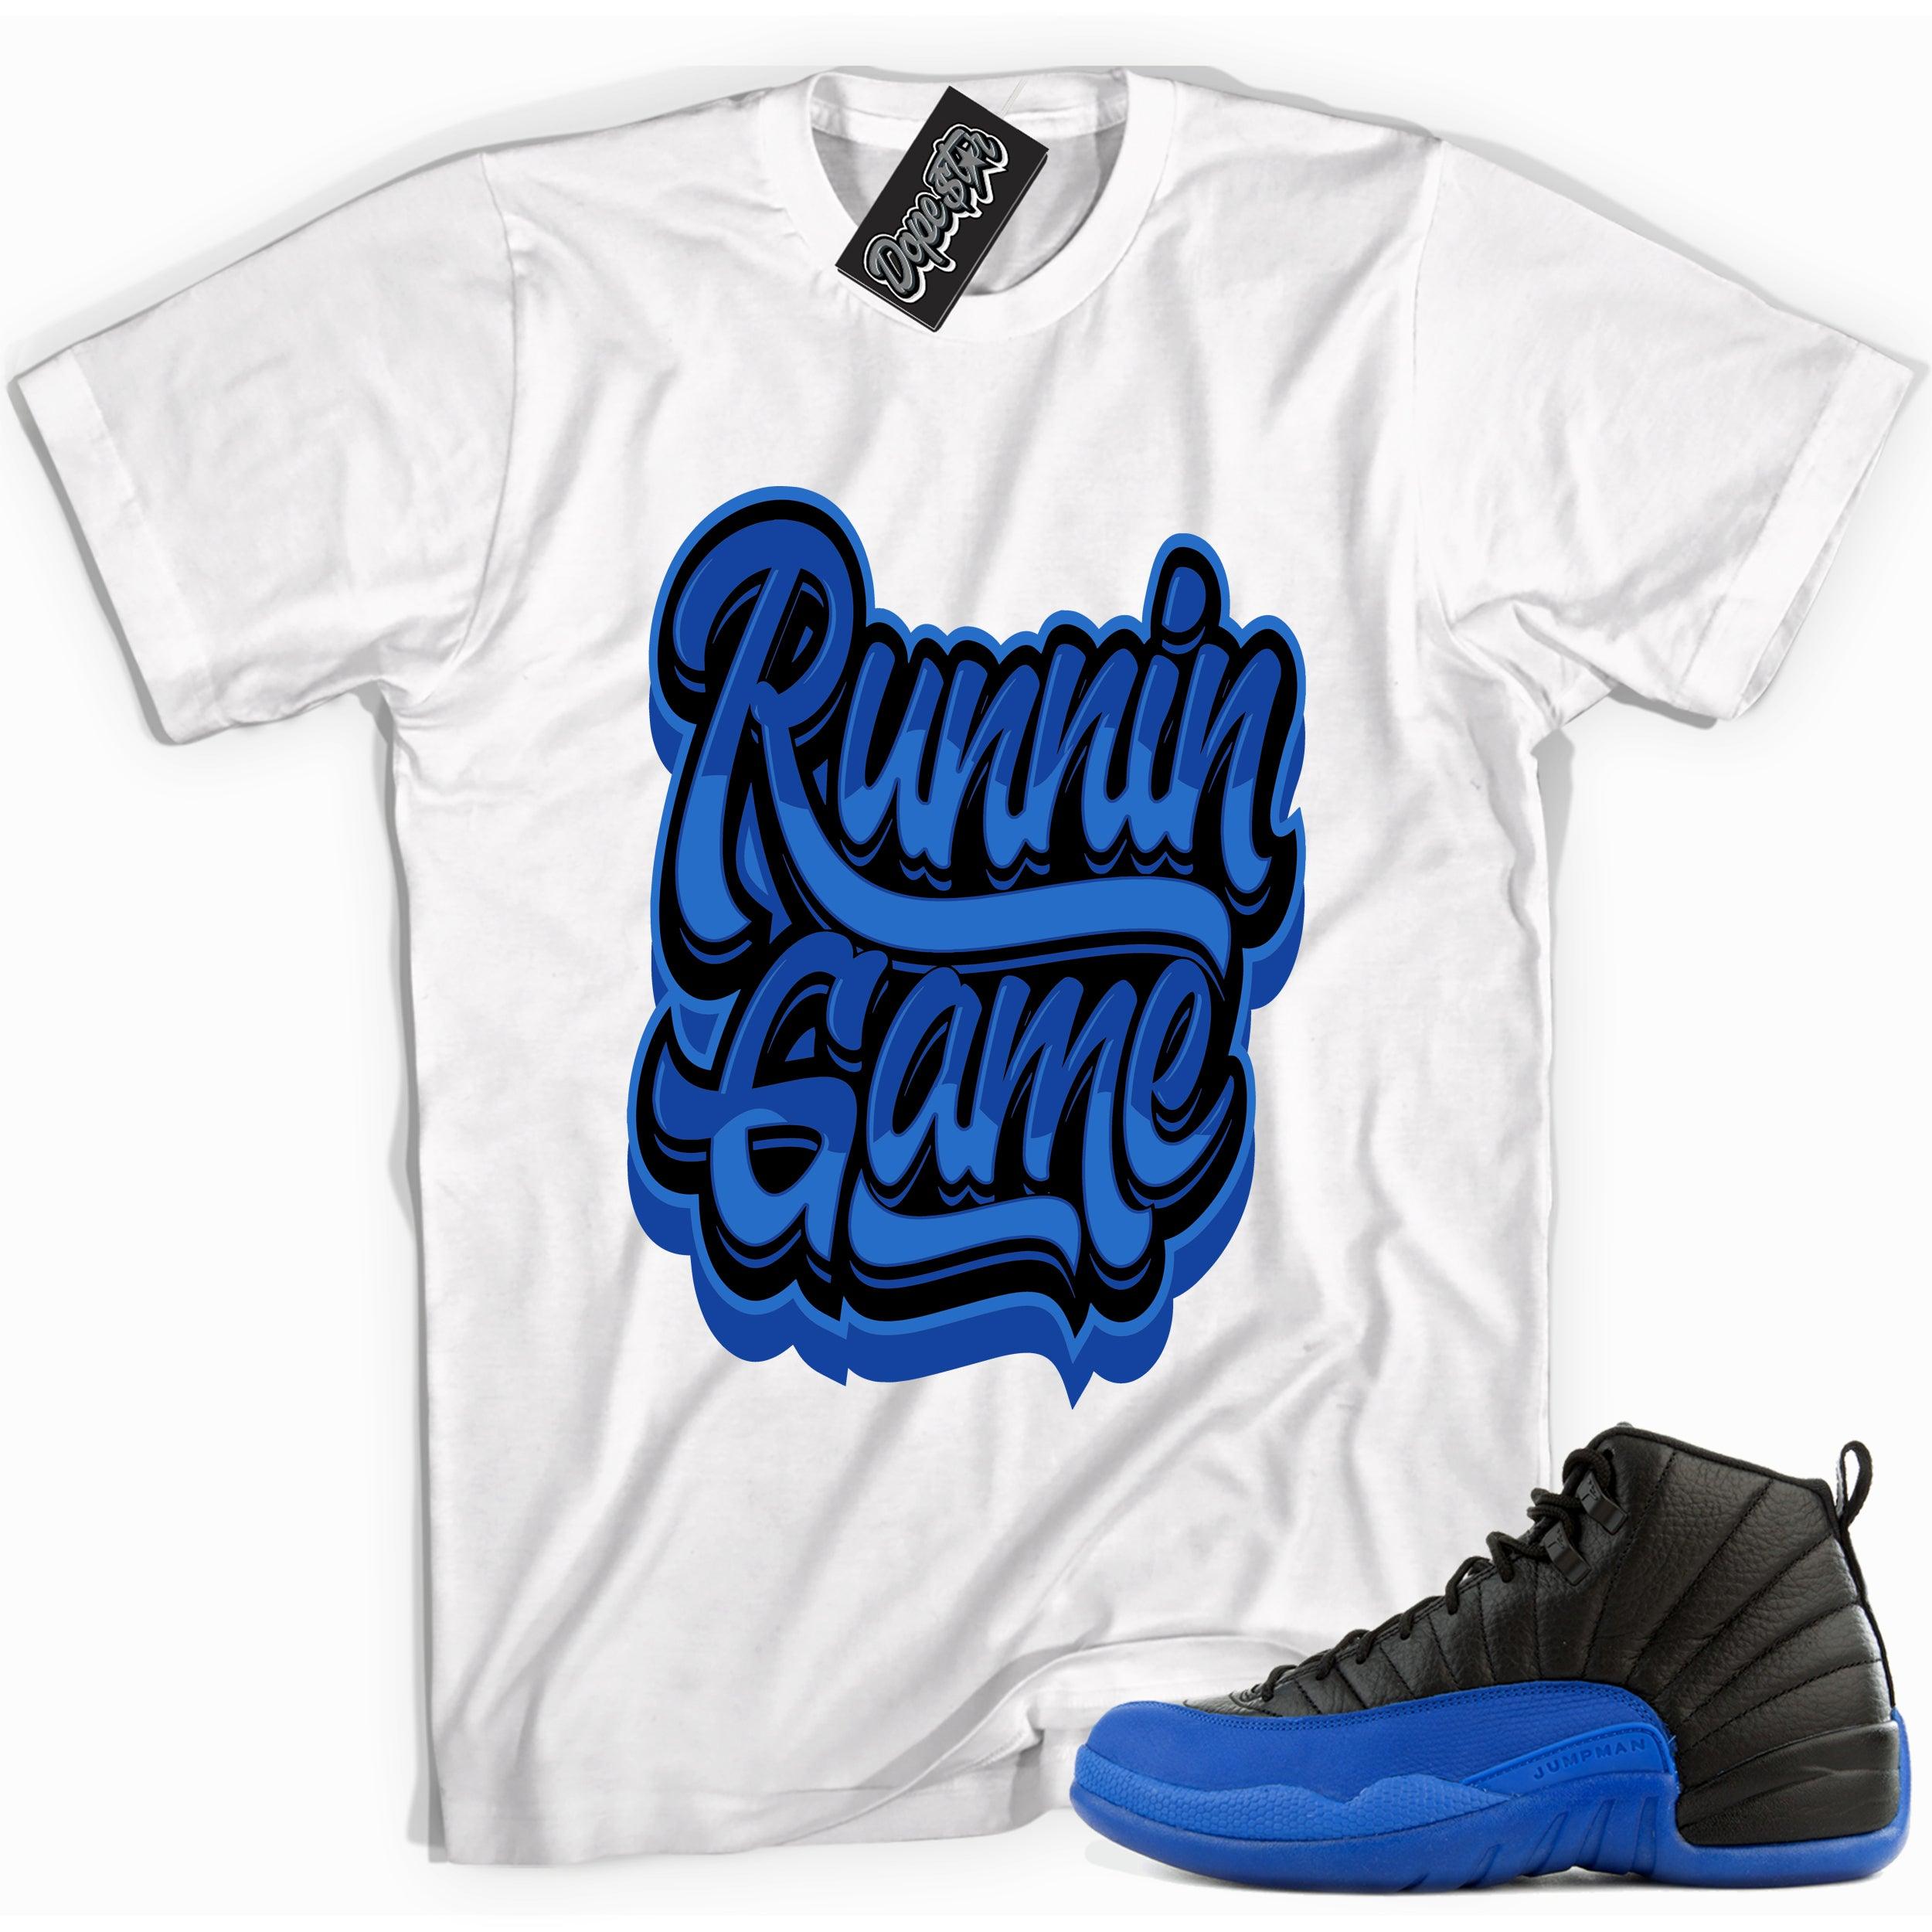 Cool white graphic tee with 'running game' print, that perfectly matches Air Jordan 12 Retro Black Game Royal sneakers.